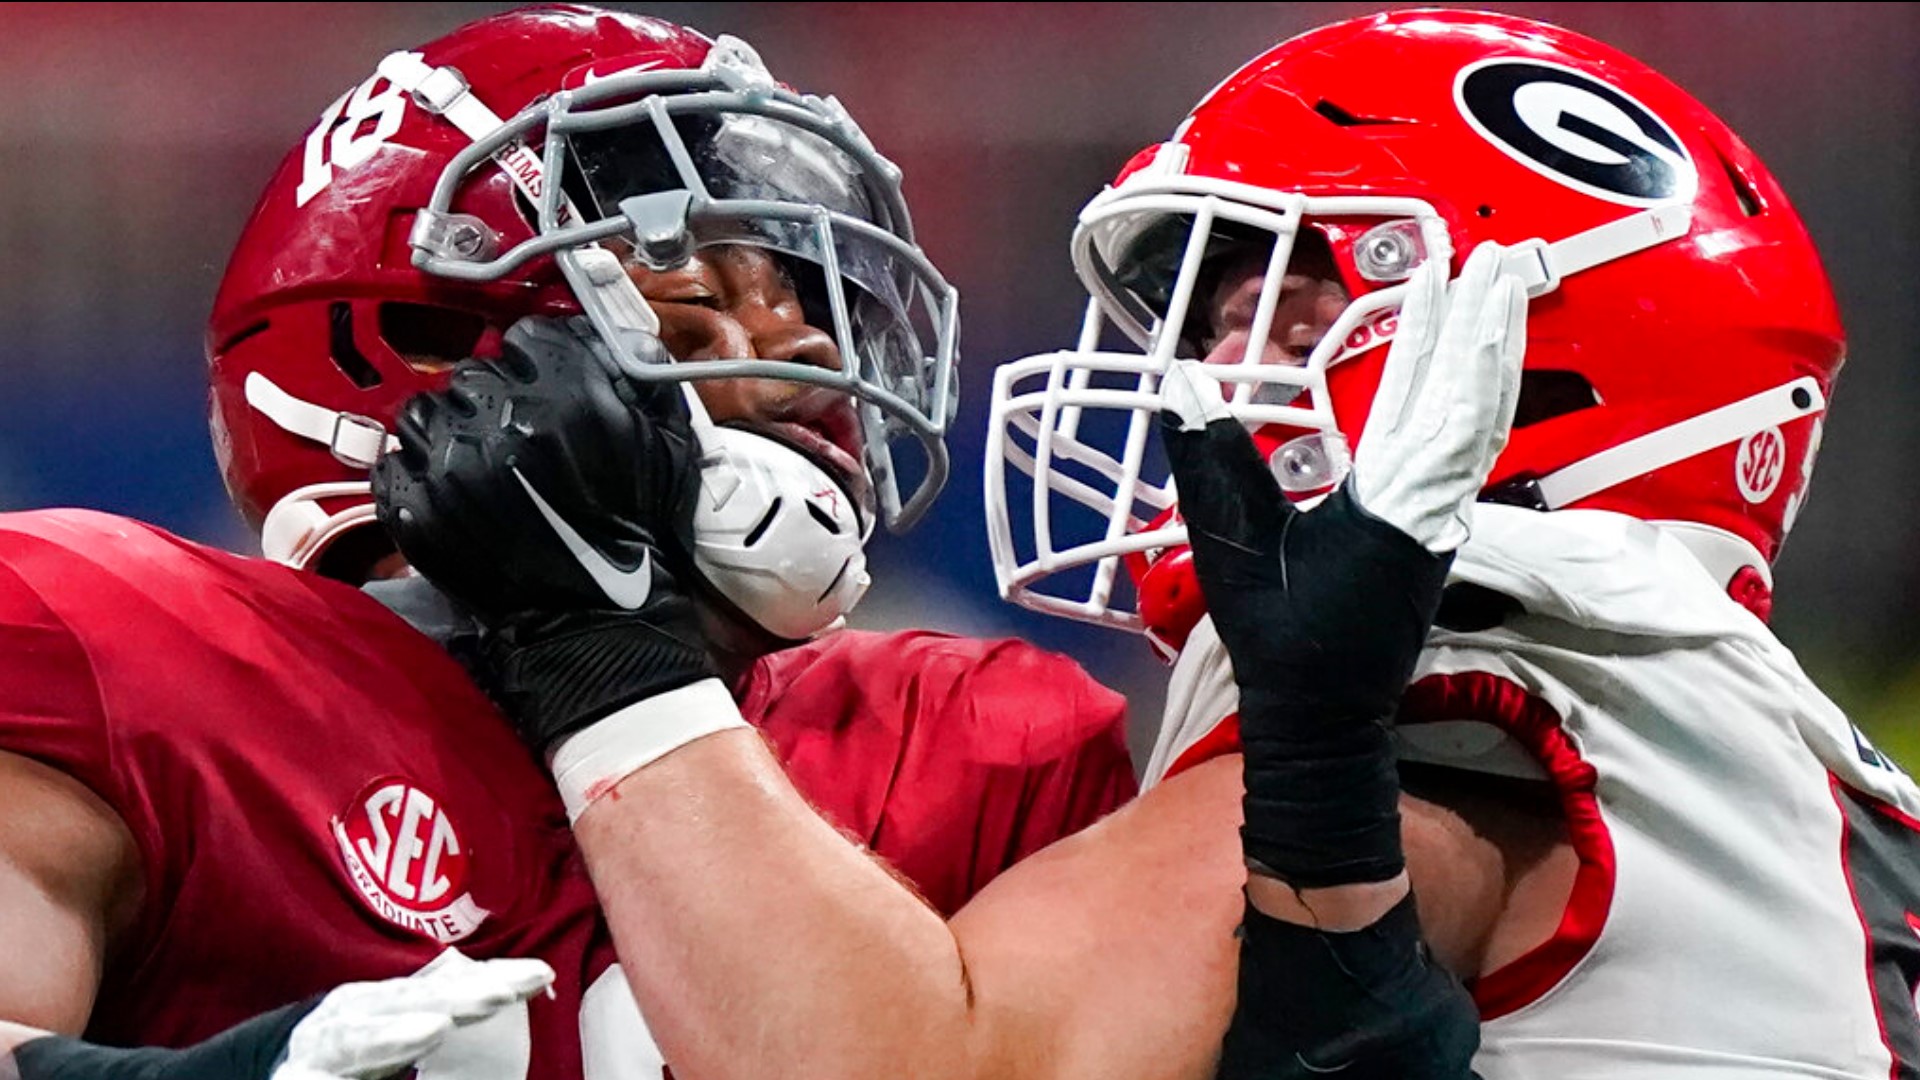 The Georgia Bulldogs will once again face off against the Alabama Crimson Tide in the College Football Playoff National Championship game Monday.